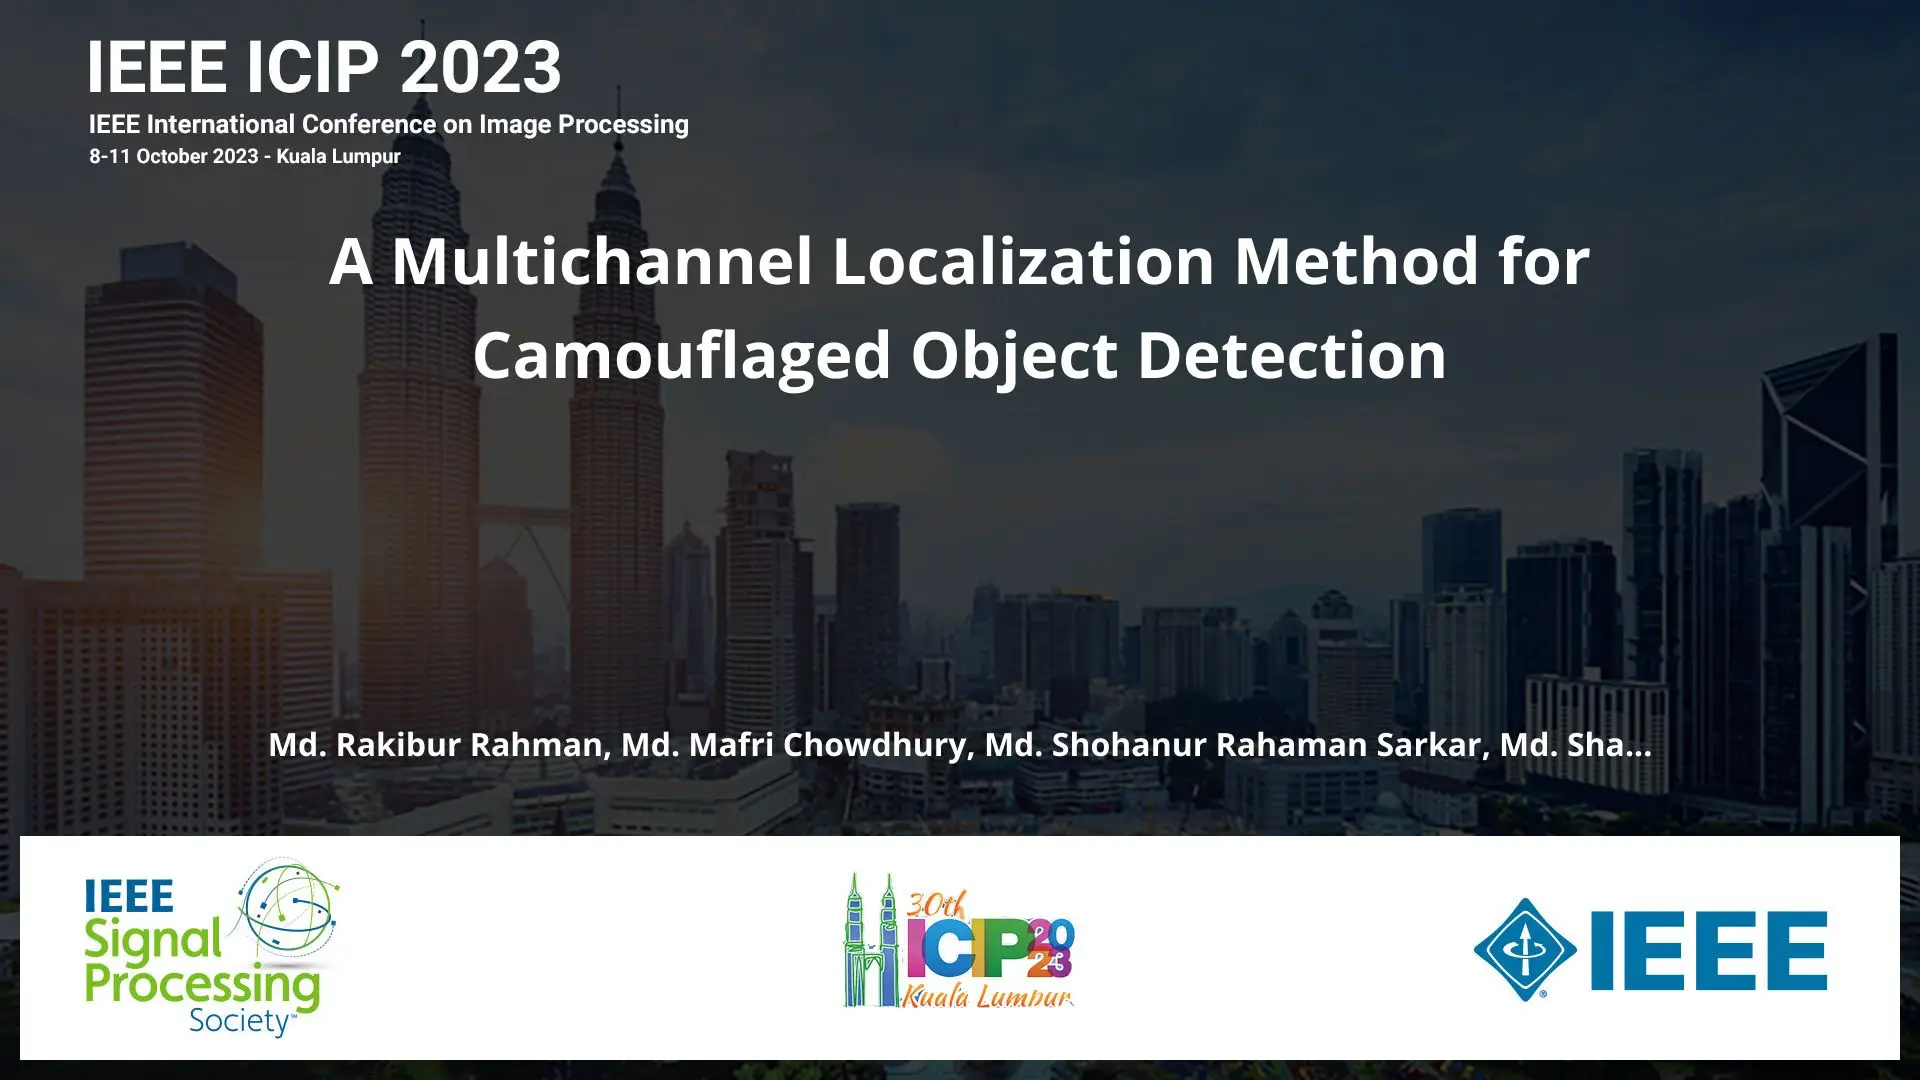 A Multichannel Localization Method for Camouflaged Object Detection